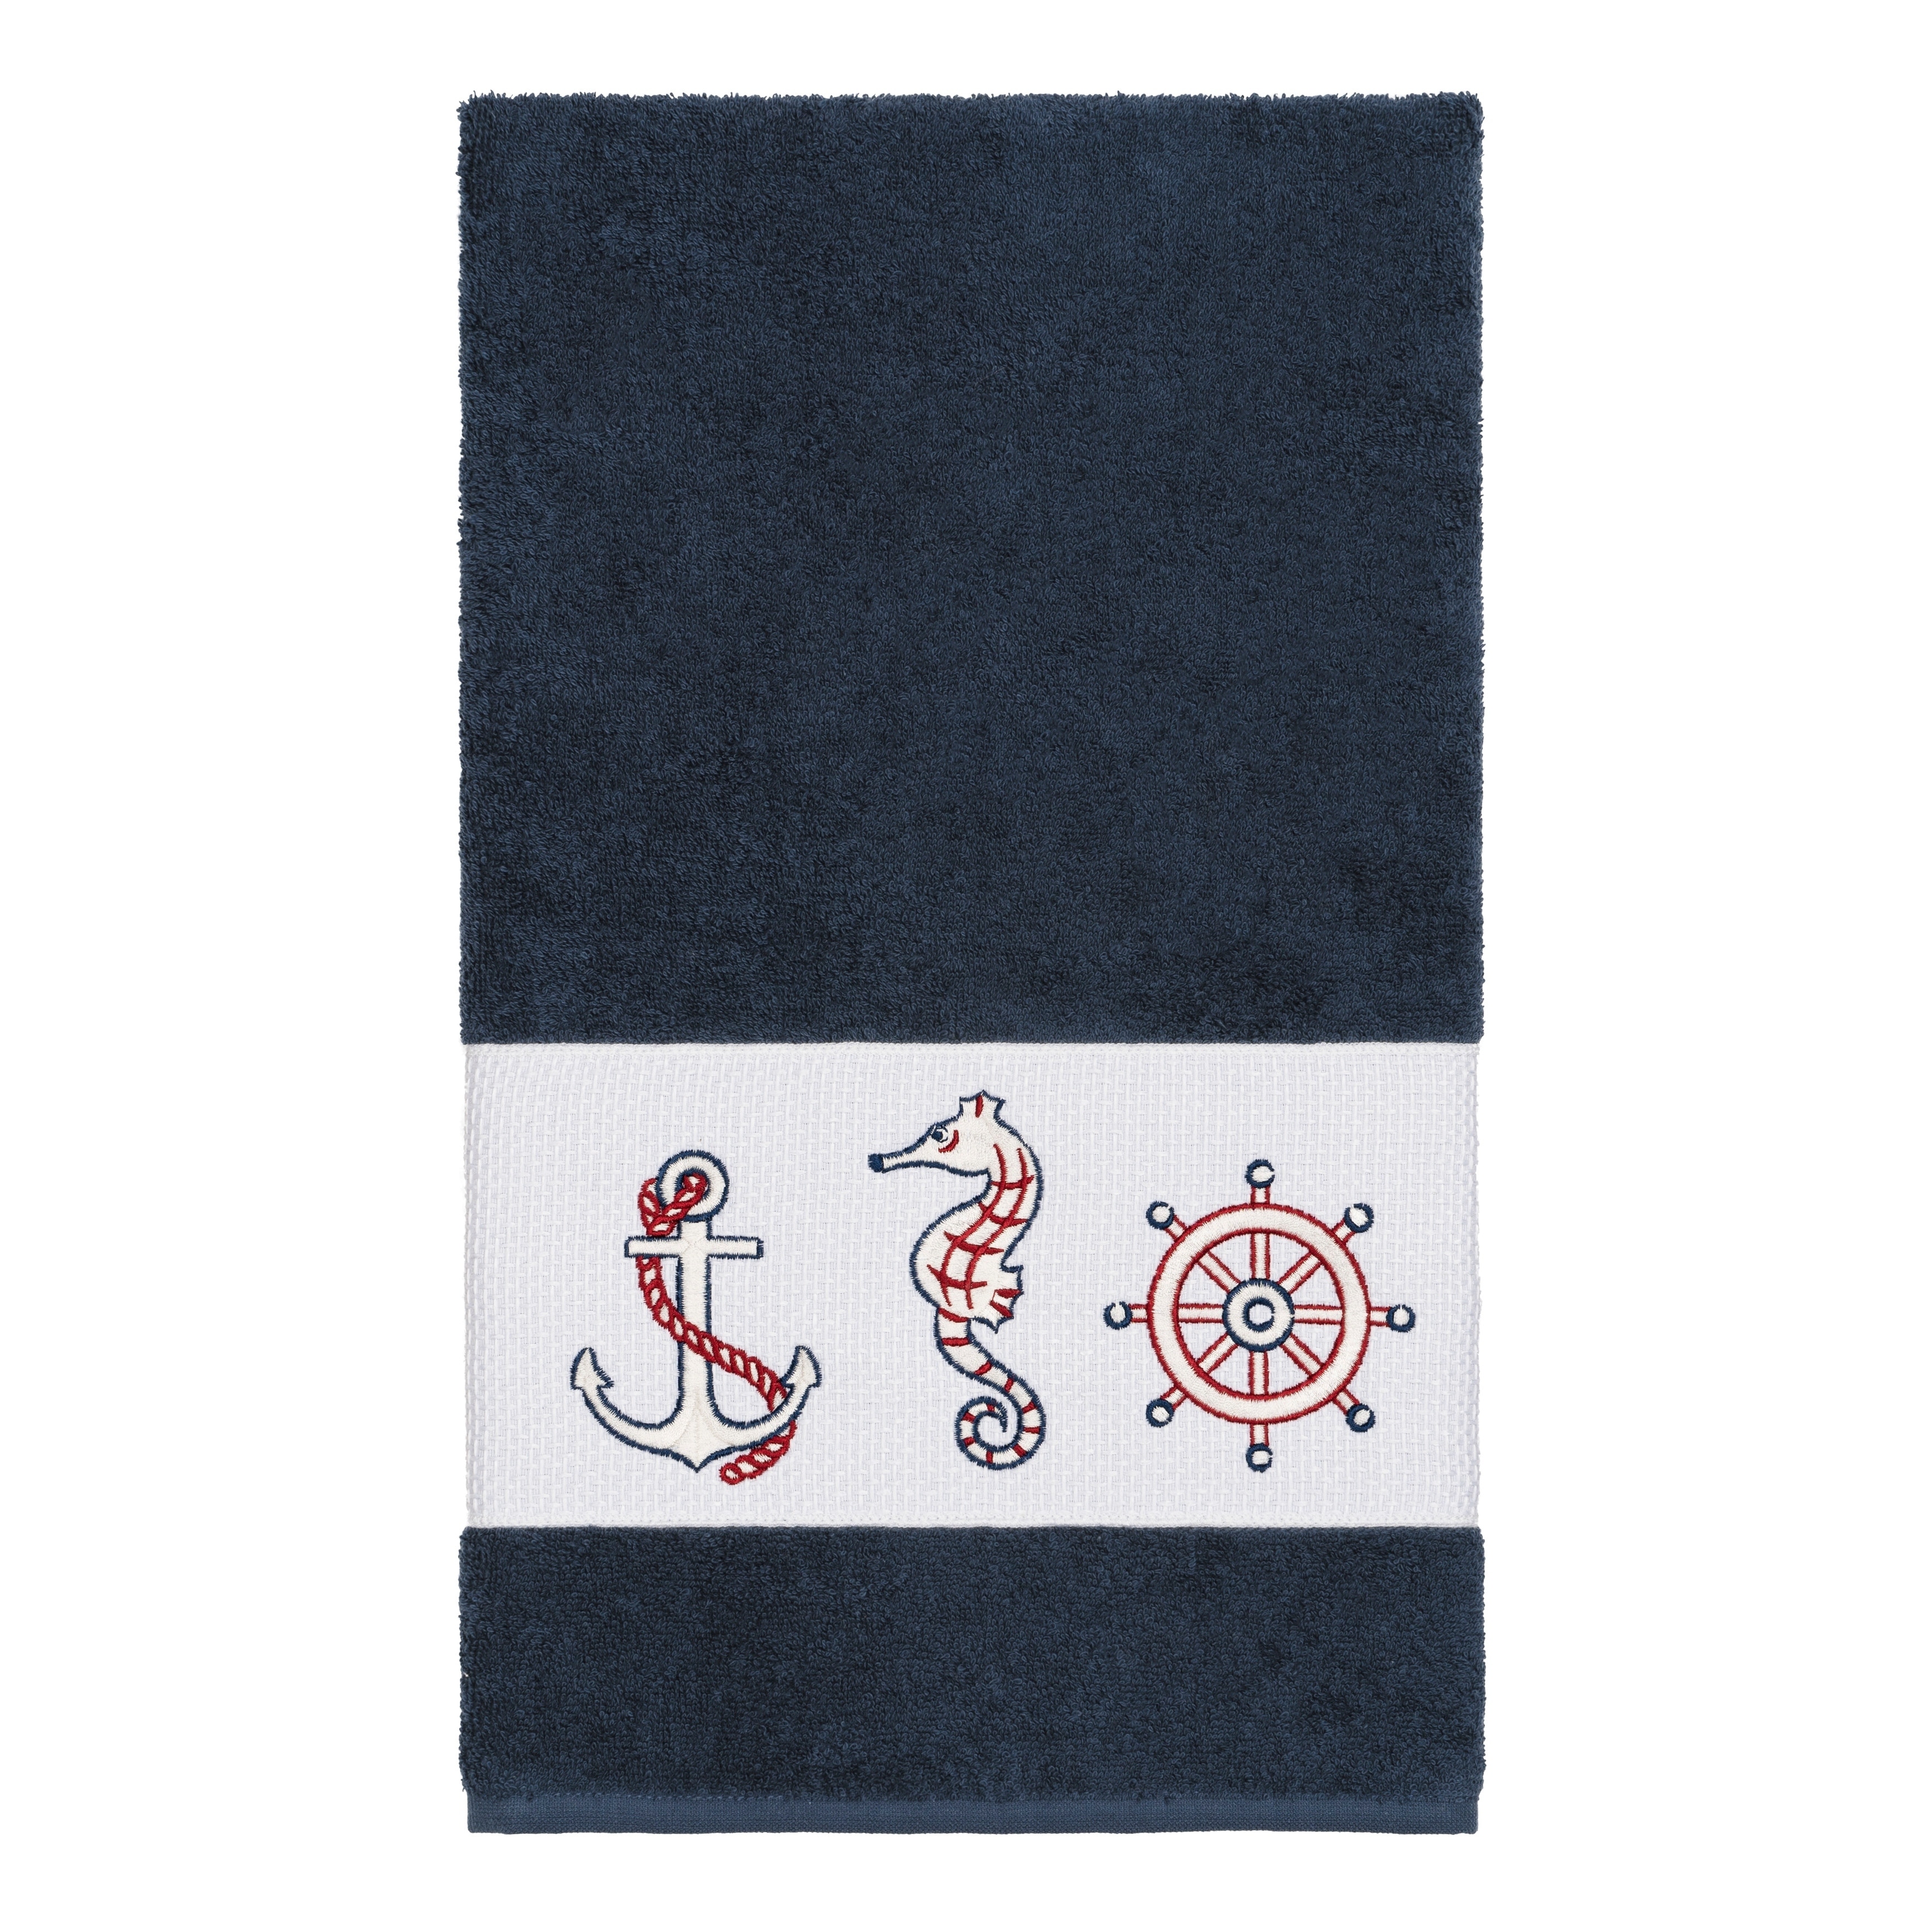 https://ak1.ostkcdn.com/images/products/22355591/Authentic-Hotel-and-Spa-Turkish-Cotton-Nautical-Embroidered-Midnight-Blue-Bath-Towel-65d40087-ec70-4329-9ec4-fe063e859494.jpg